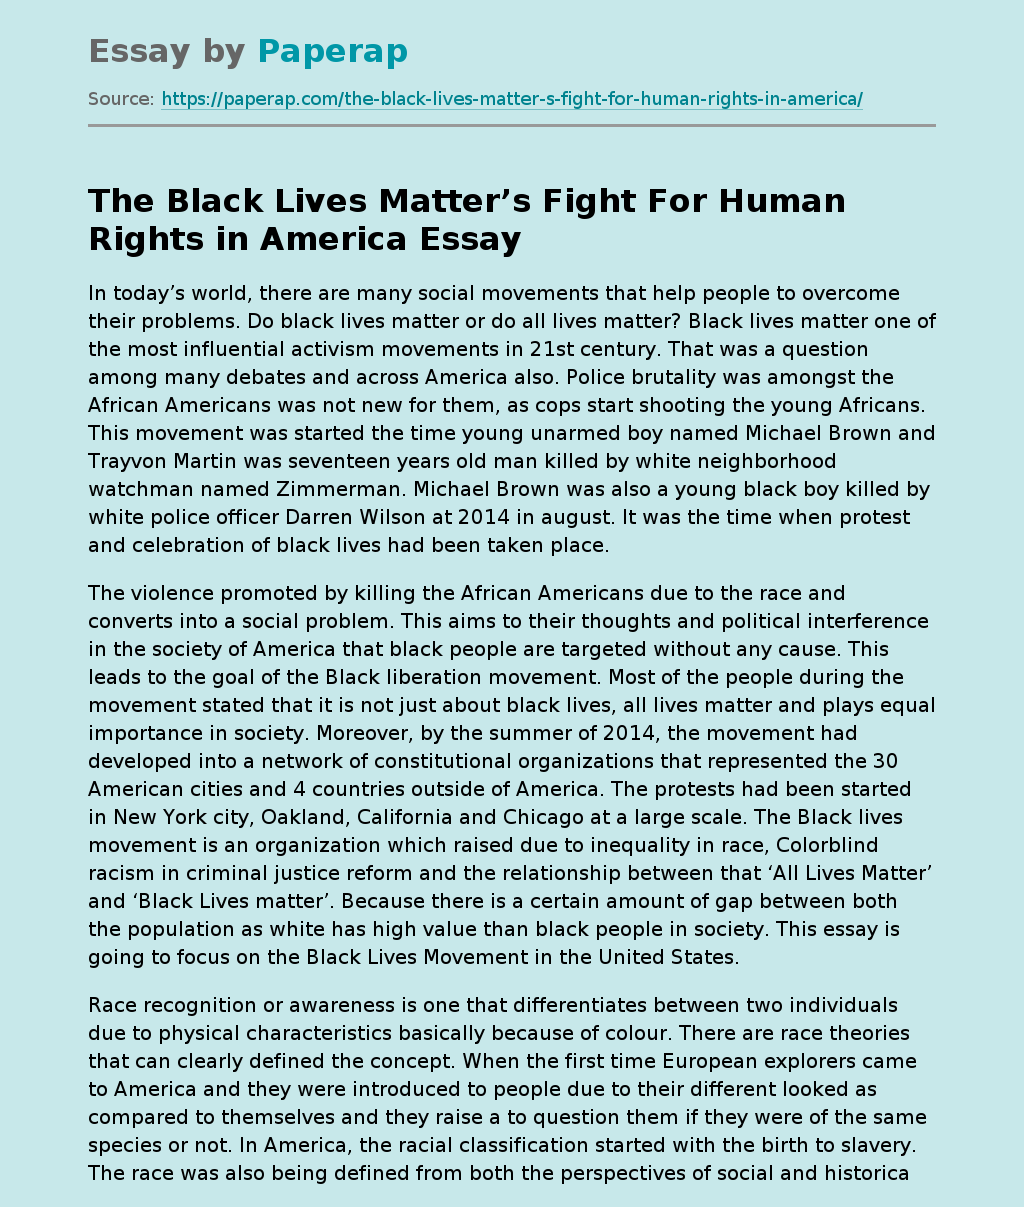 The Black Lives Matter’s Fight For Human Rights in America